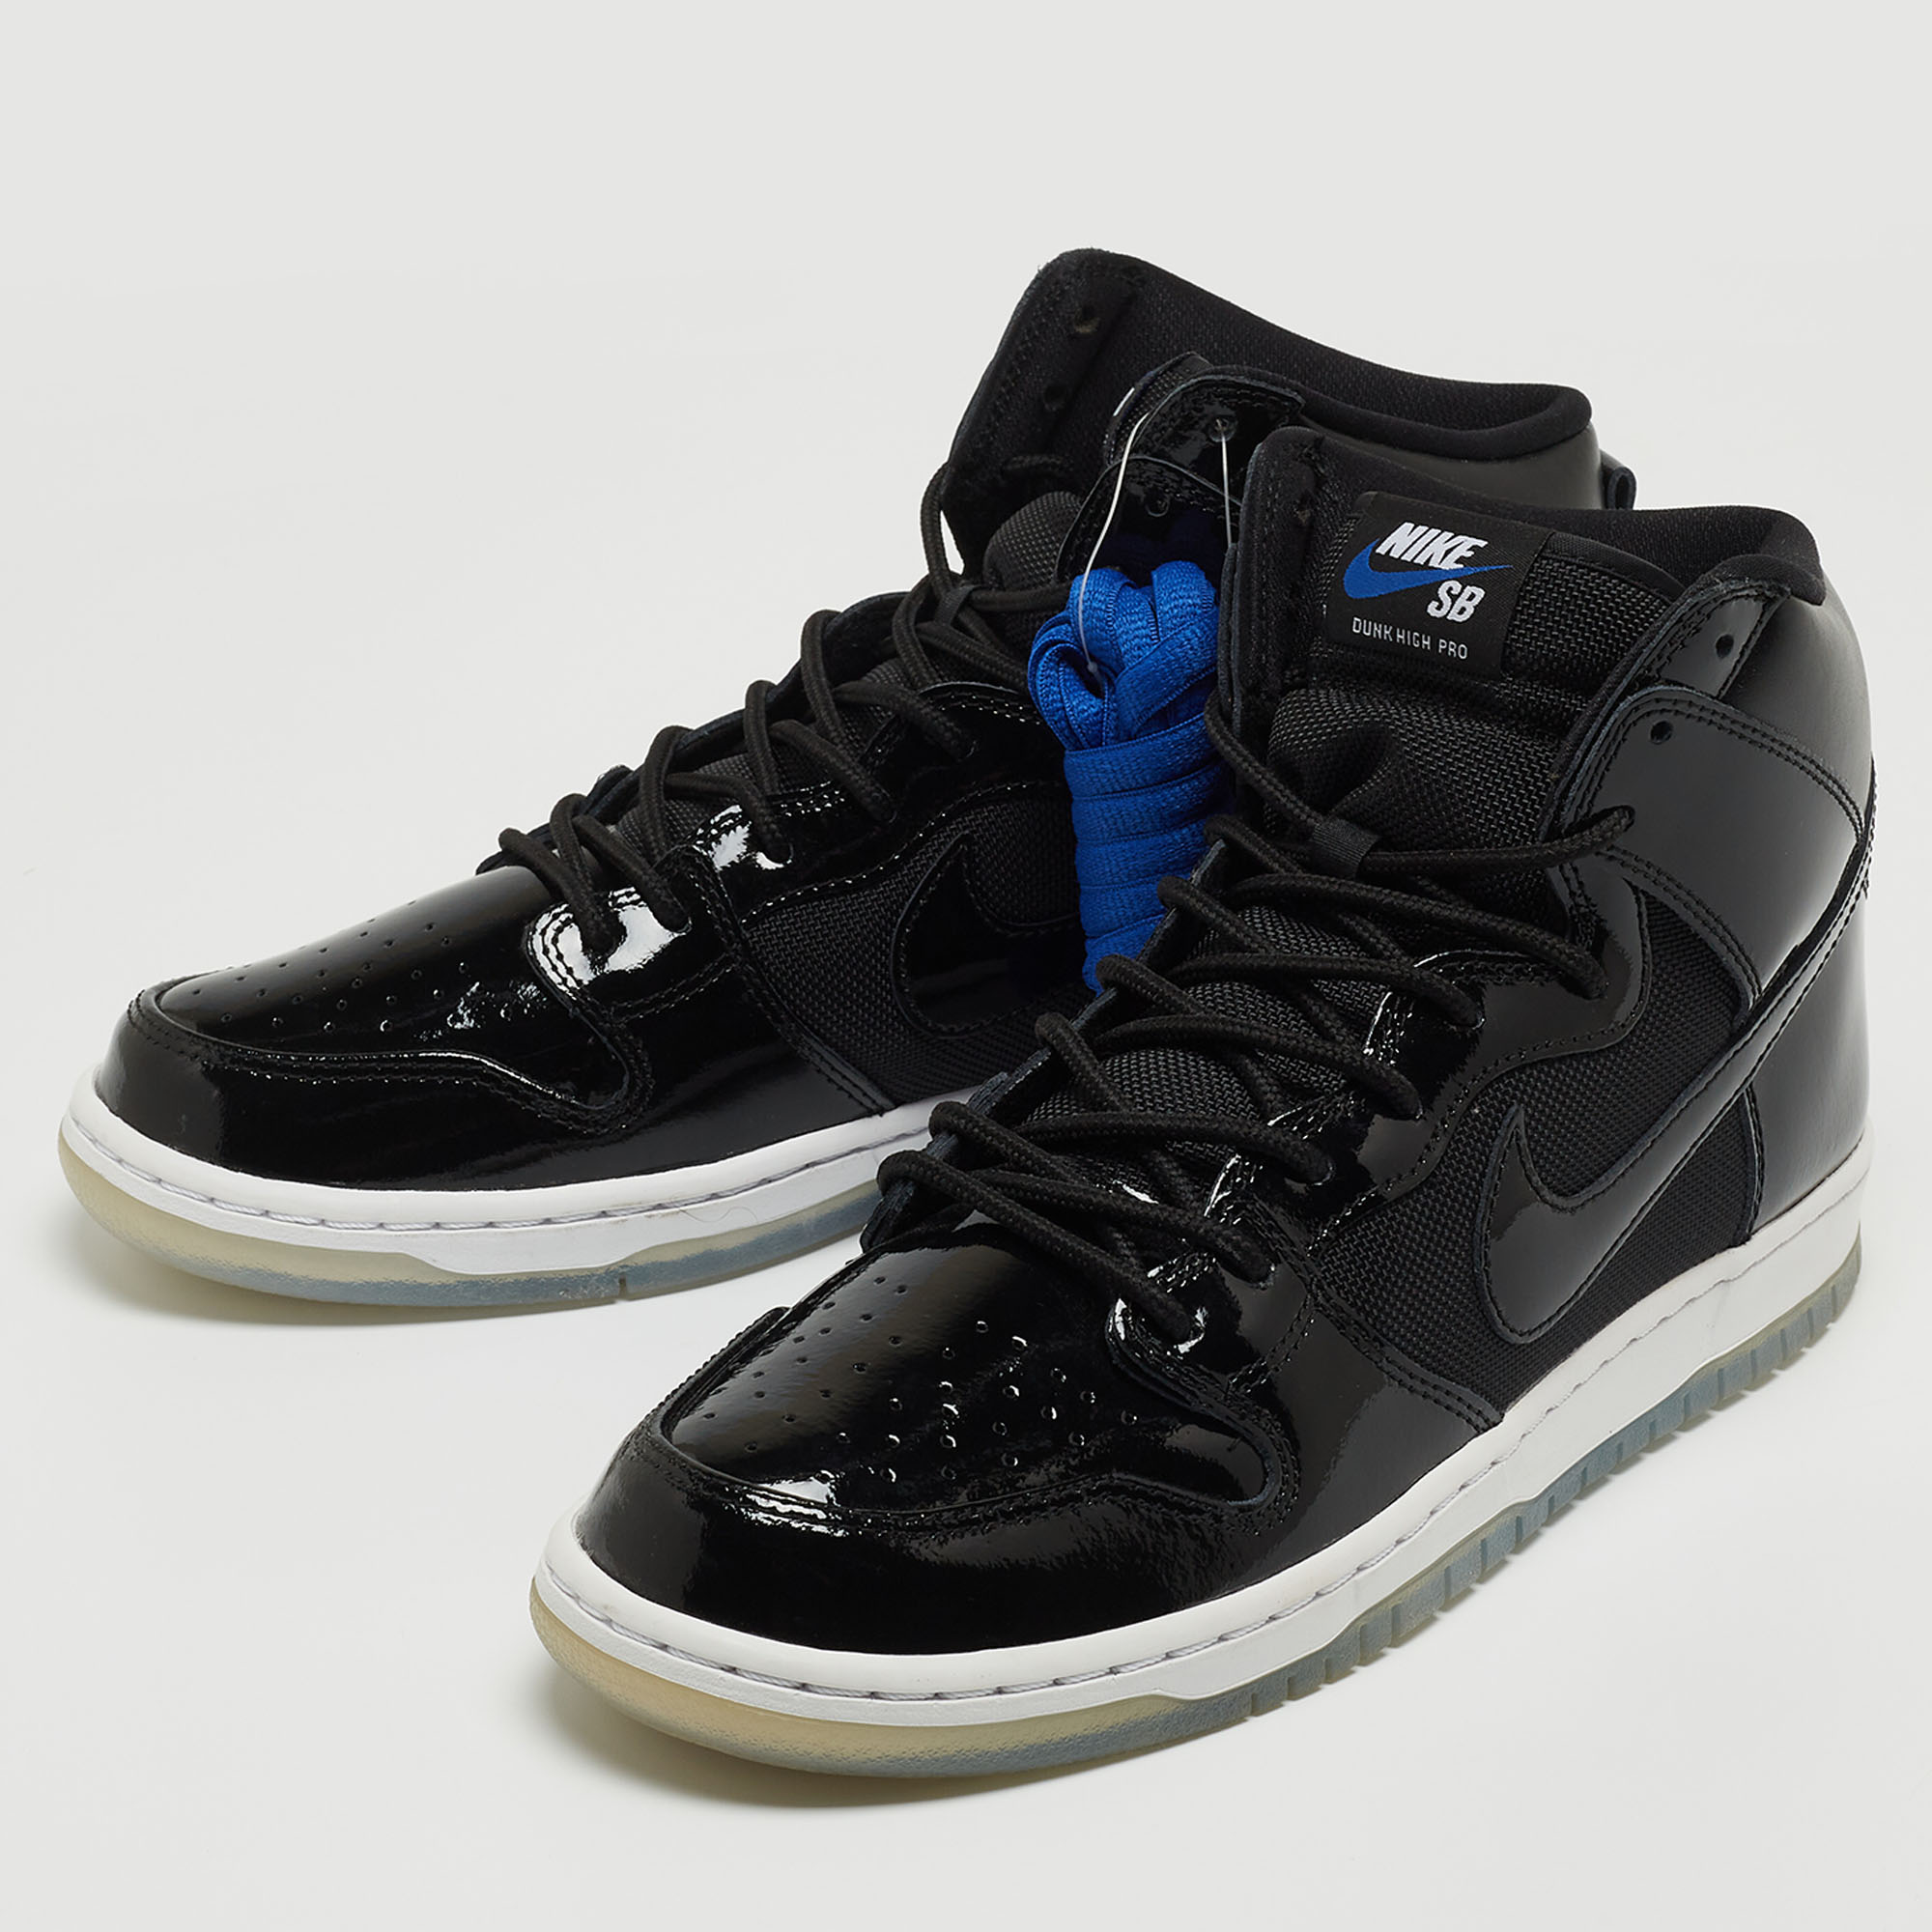 

Nike Black Mesh and Patent Leather Dunk High Pro Sneakers Size